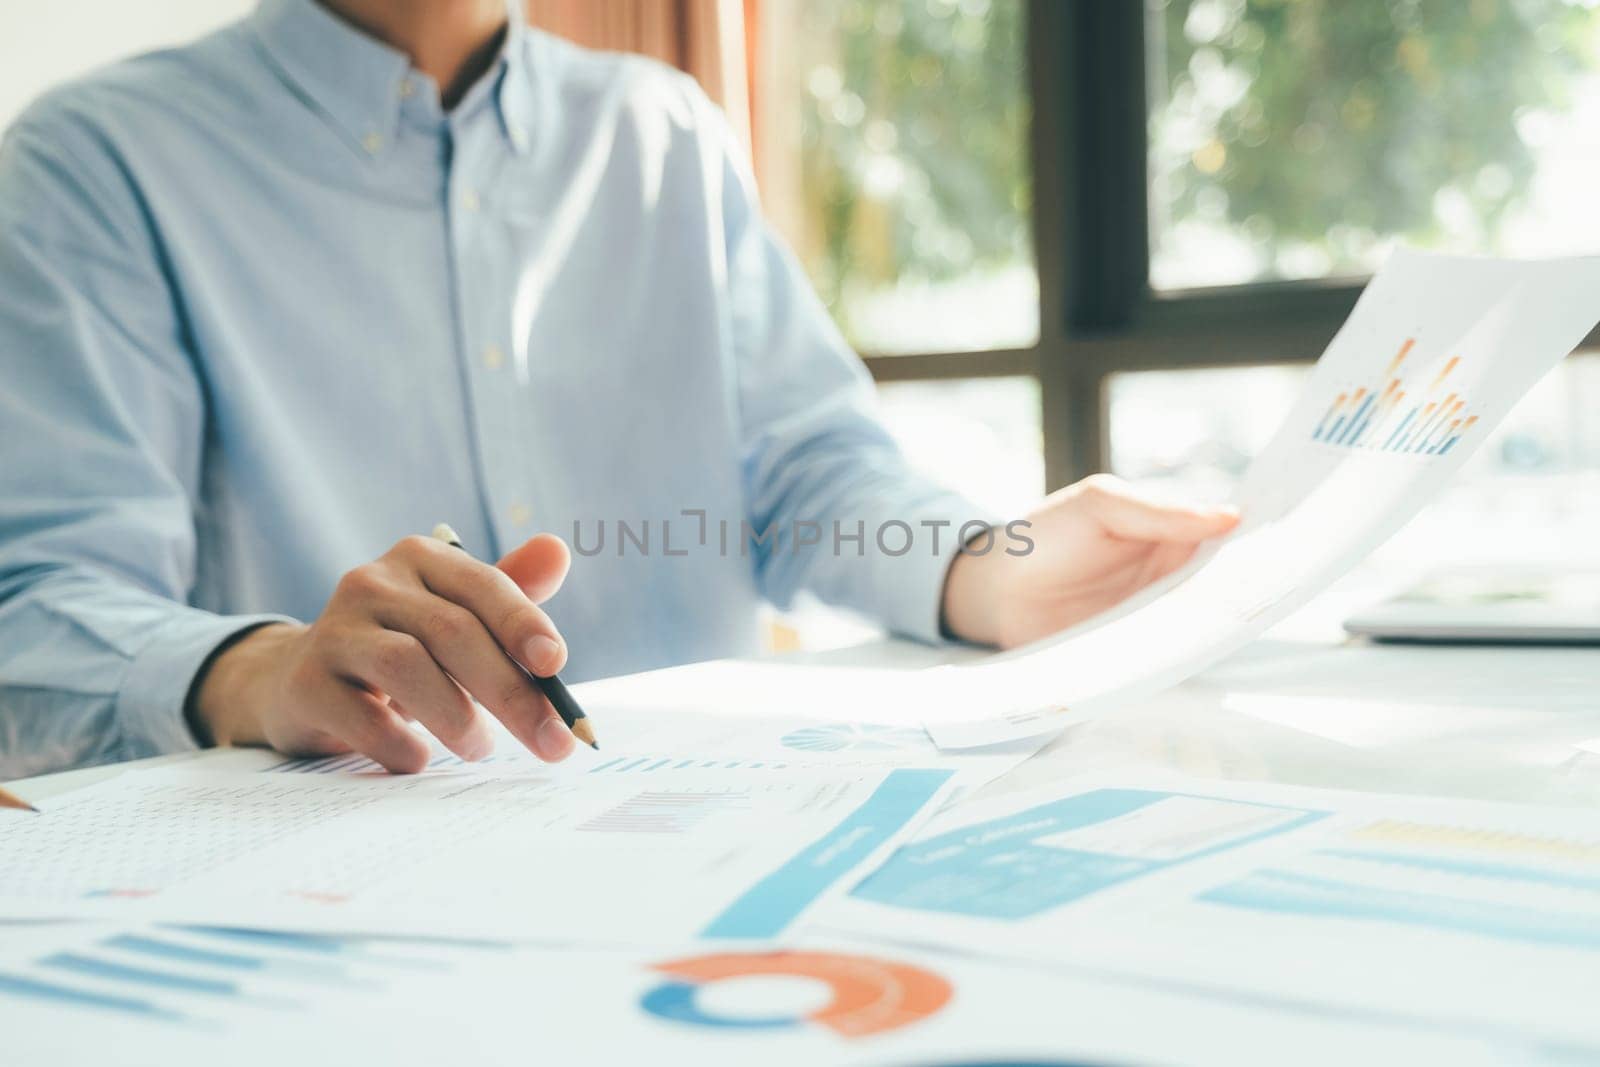 Close-up of businessmen working together at workplace, discussing about strategies, plans, analytic progress, and financial stats, and pointing at graph documents on desk holding pencils. Business and Teamwork concept.